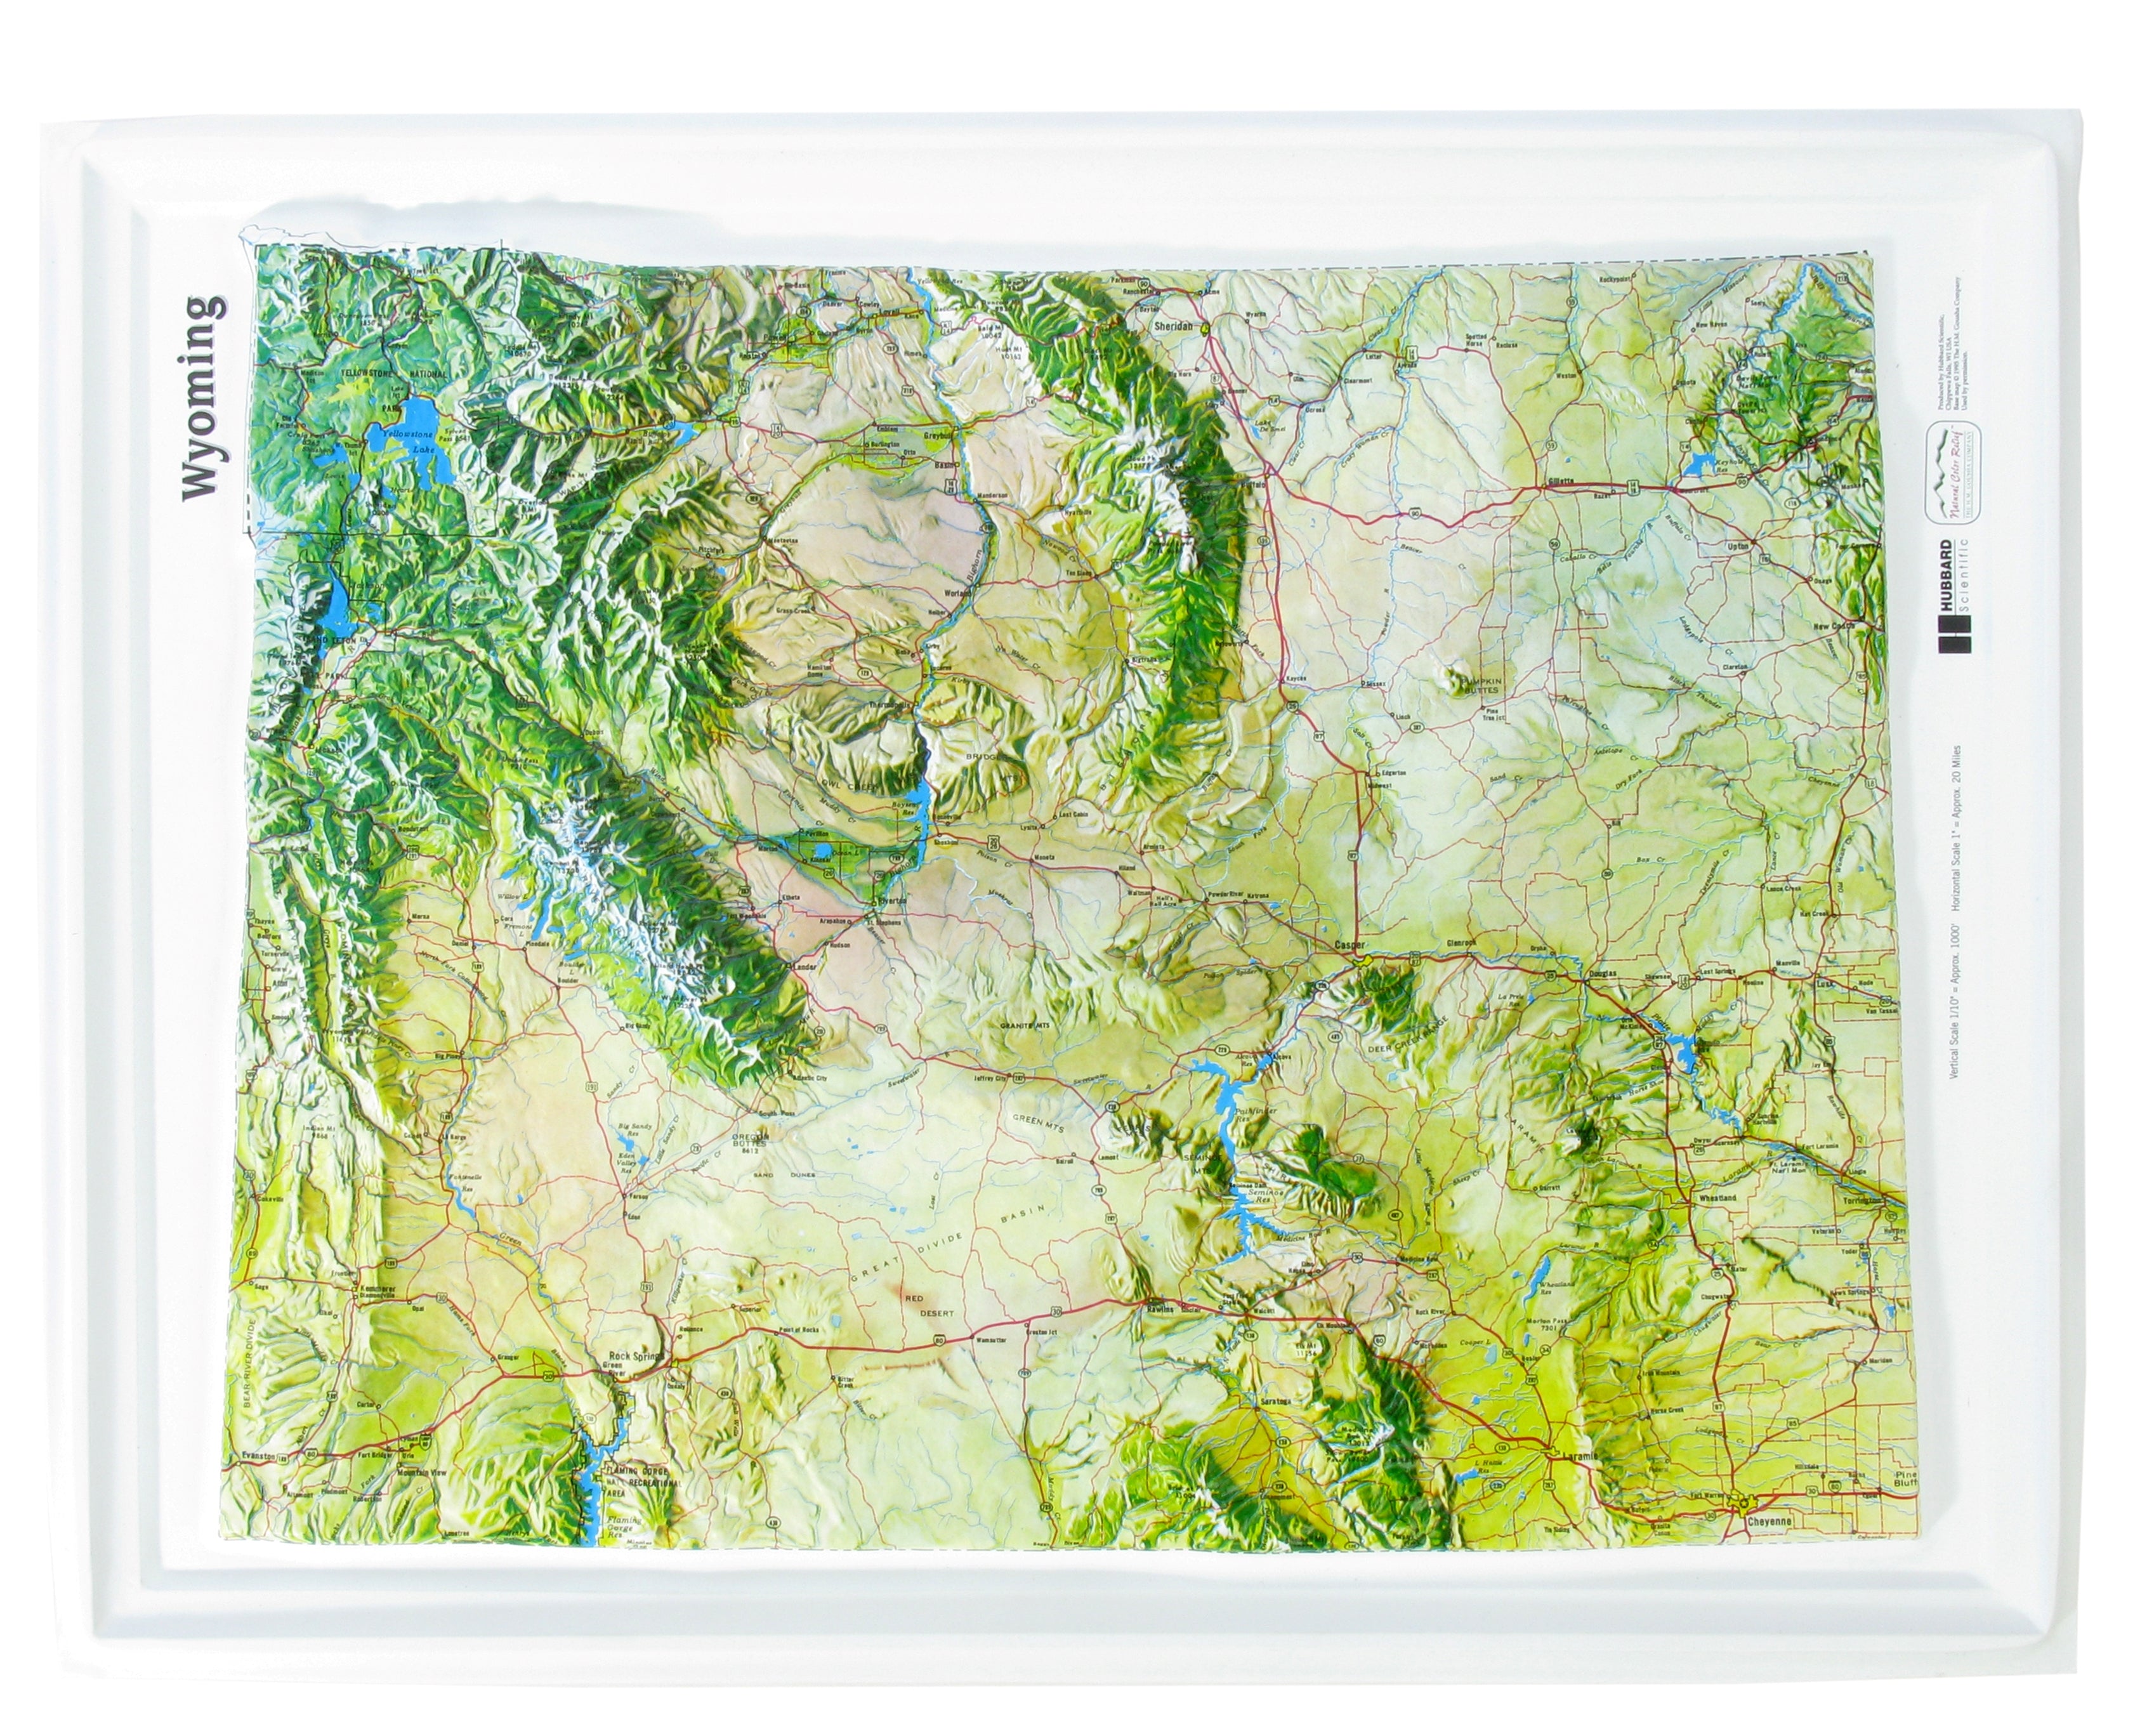 Wyoming Natural Color Relief Three Dimensional 3D Raised Relief Map